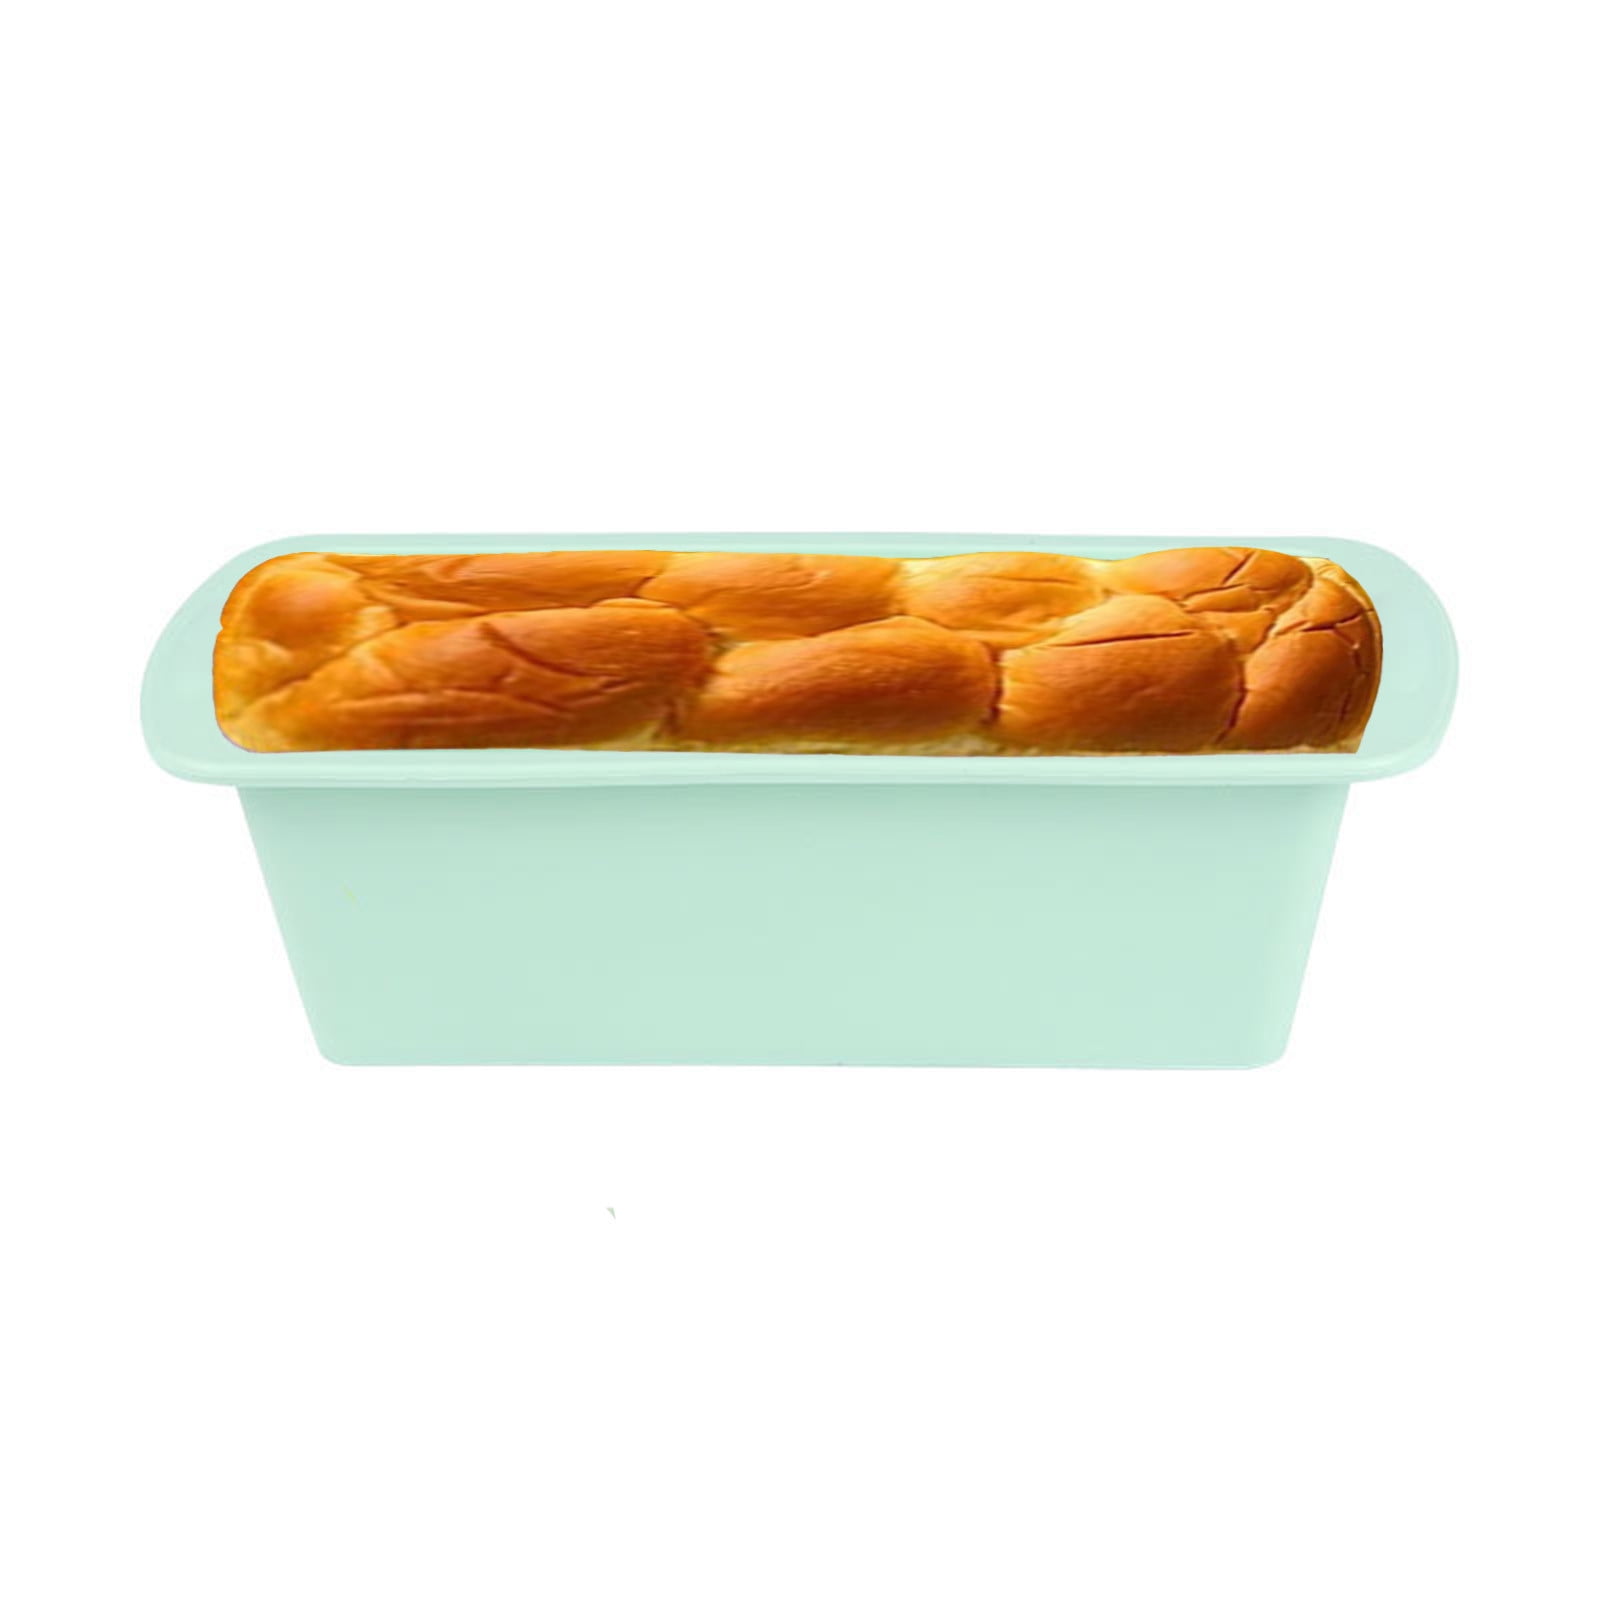 Mini Loaf Pan for Breads 4 Cups Non-stick Silicone Baking Mold DIY